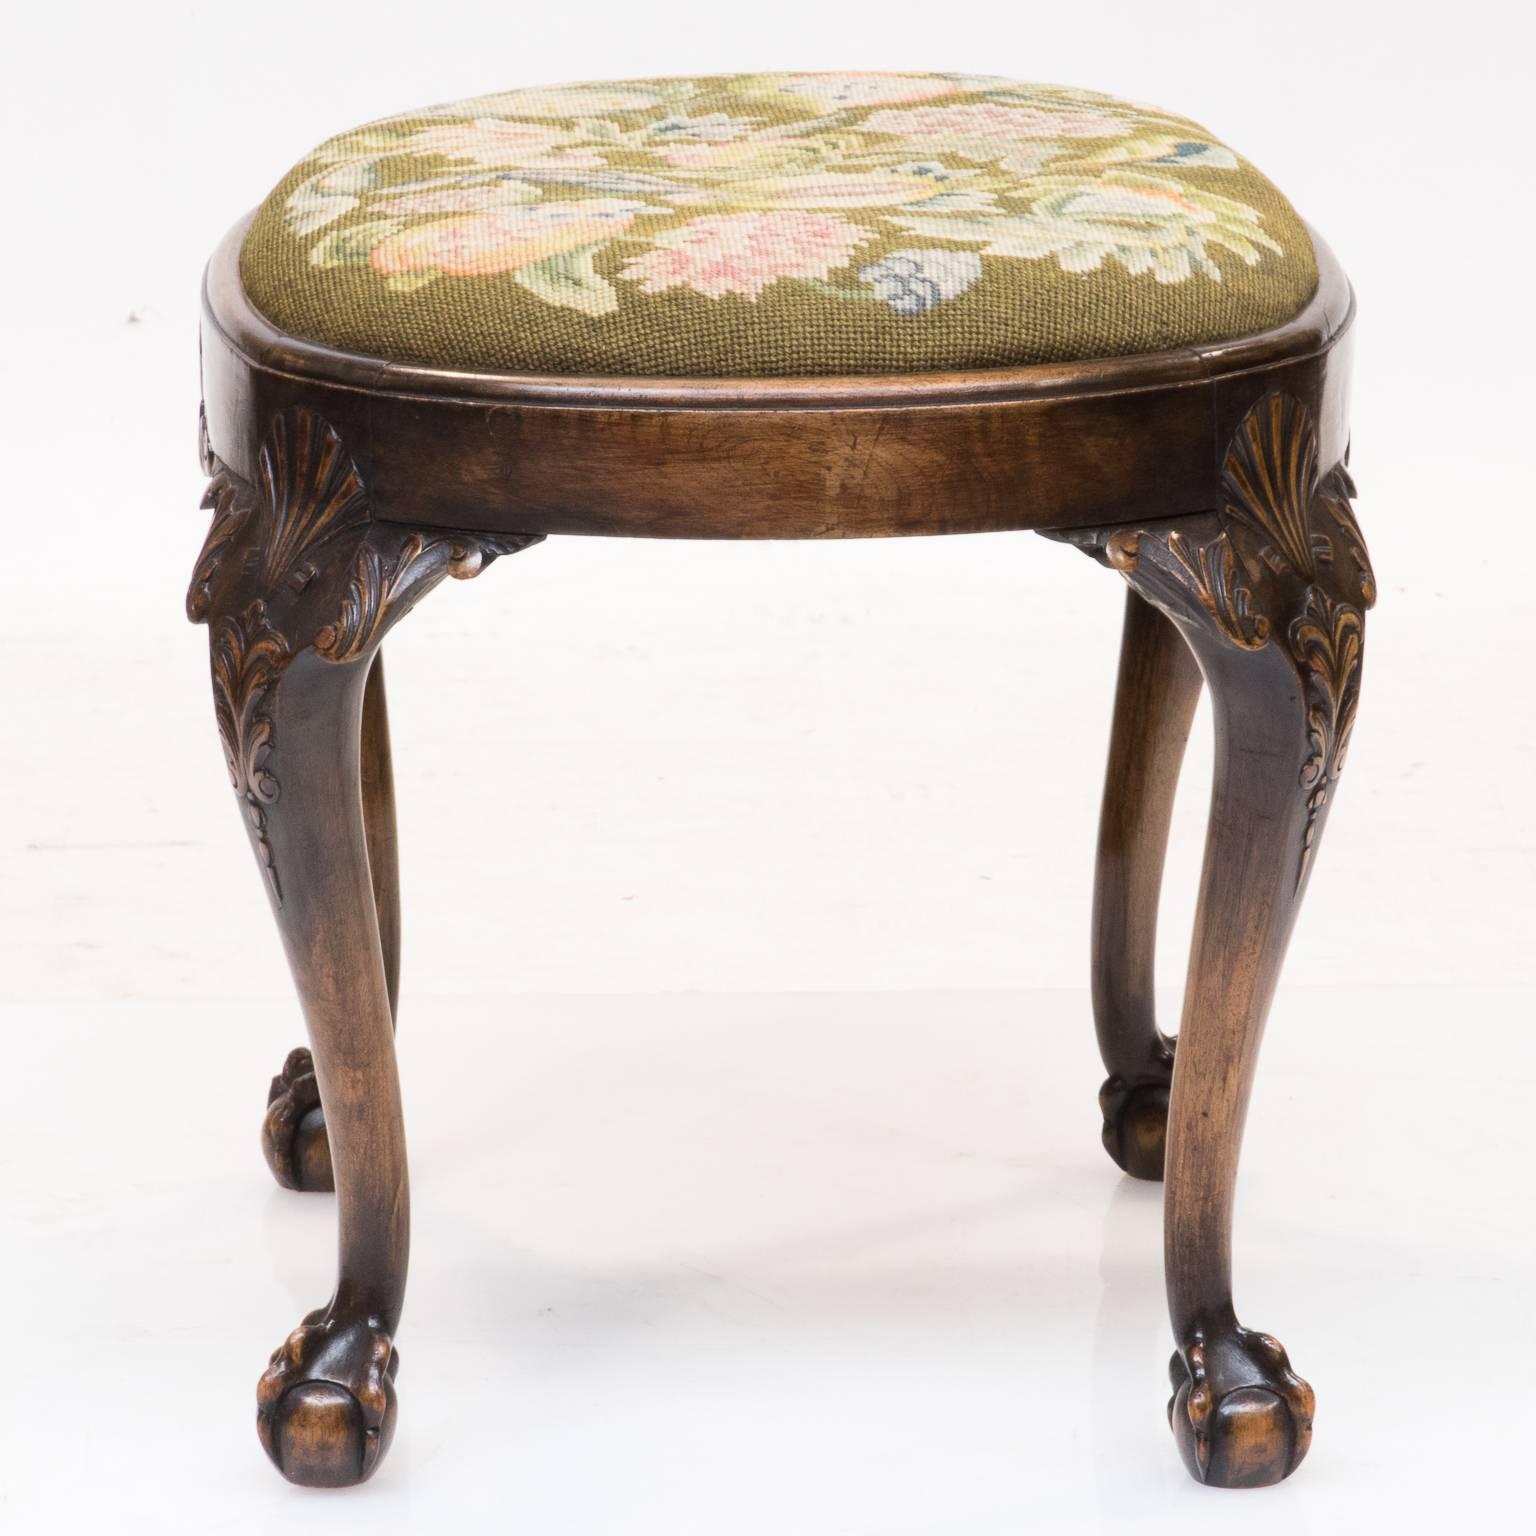 A 19th century Chippendale walnut oval stool with tapestry seat and resting on a claw and ball foot. Well-proportioned cabriole legs with detailed carved knee's. This bench has a shaped apron with shell carvings. One way to tell the quality is to